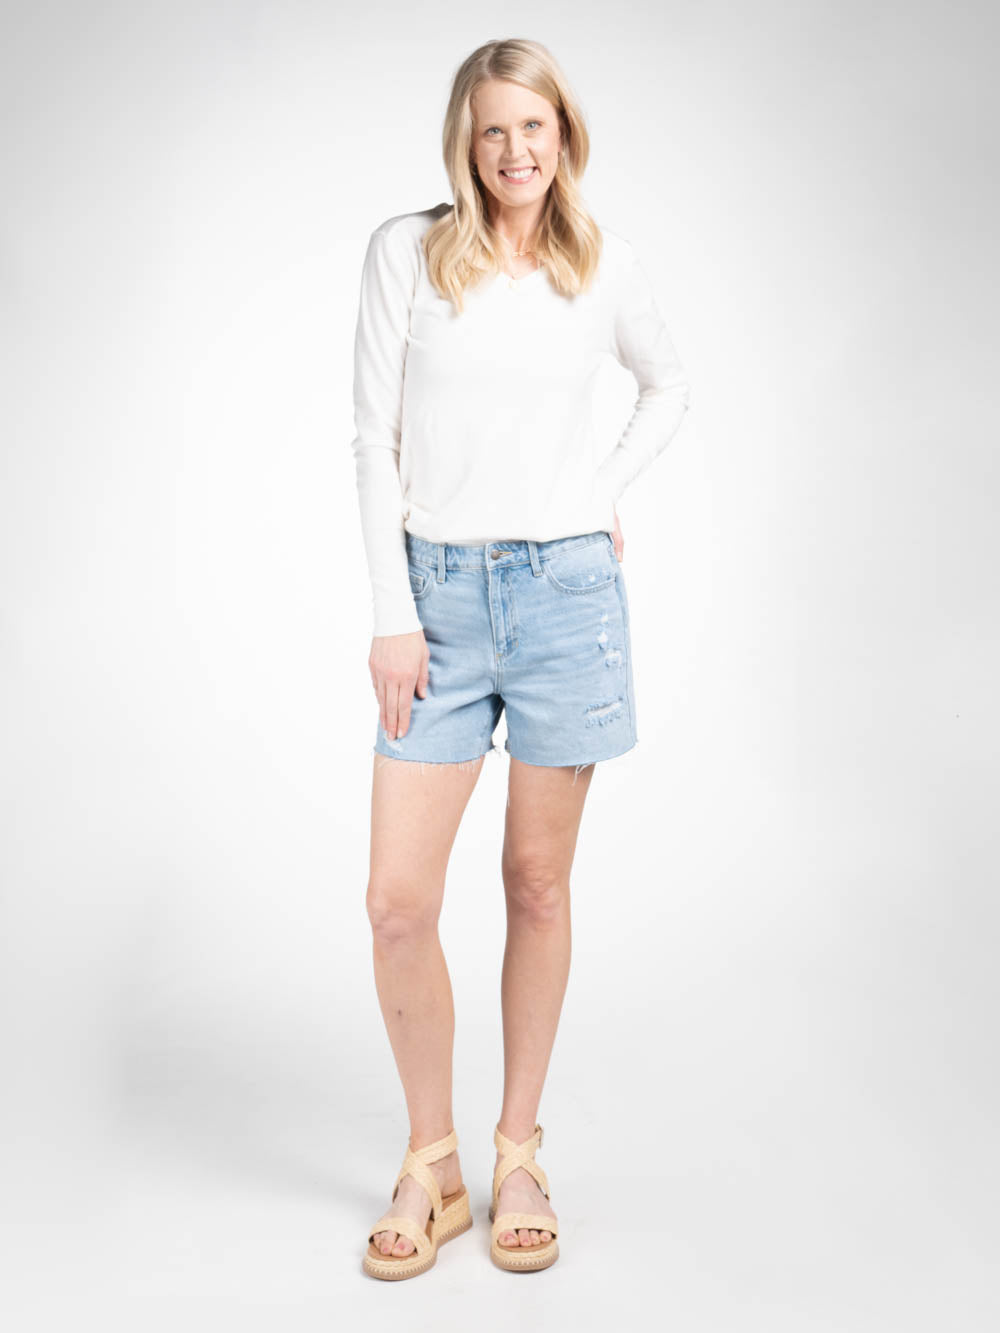 5" Inseam Jean Shorts for Tall Women